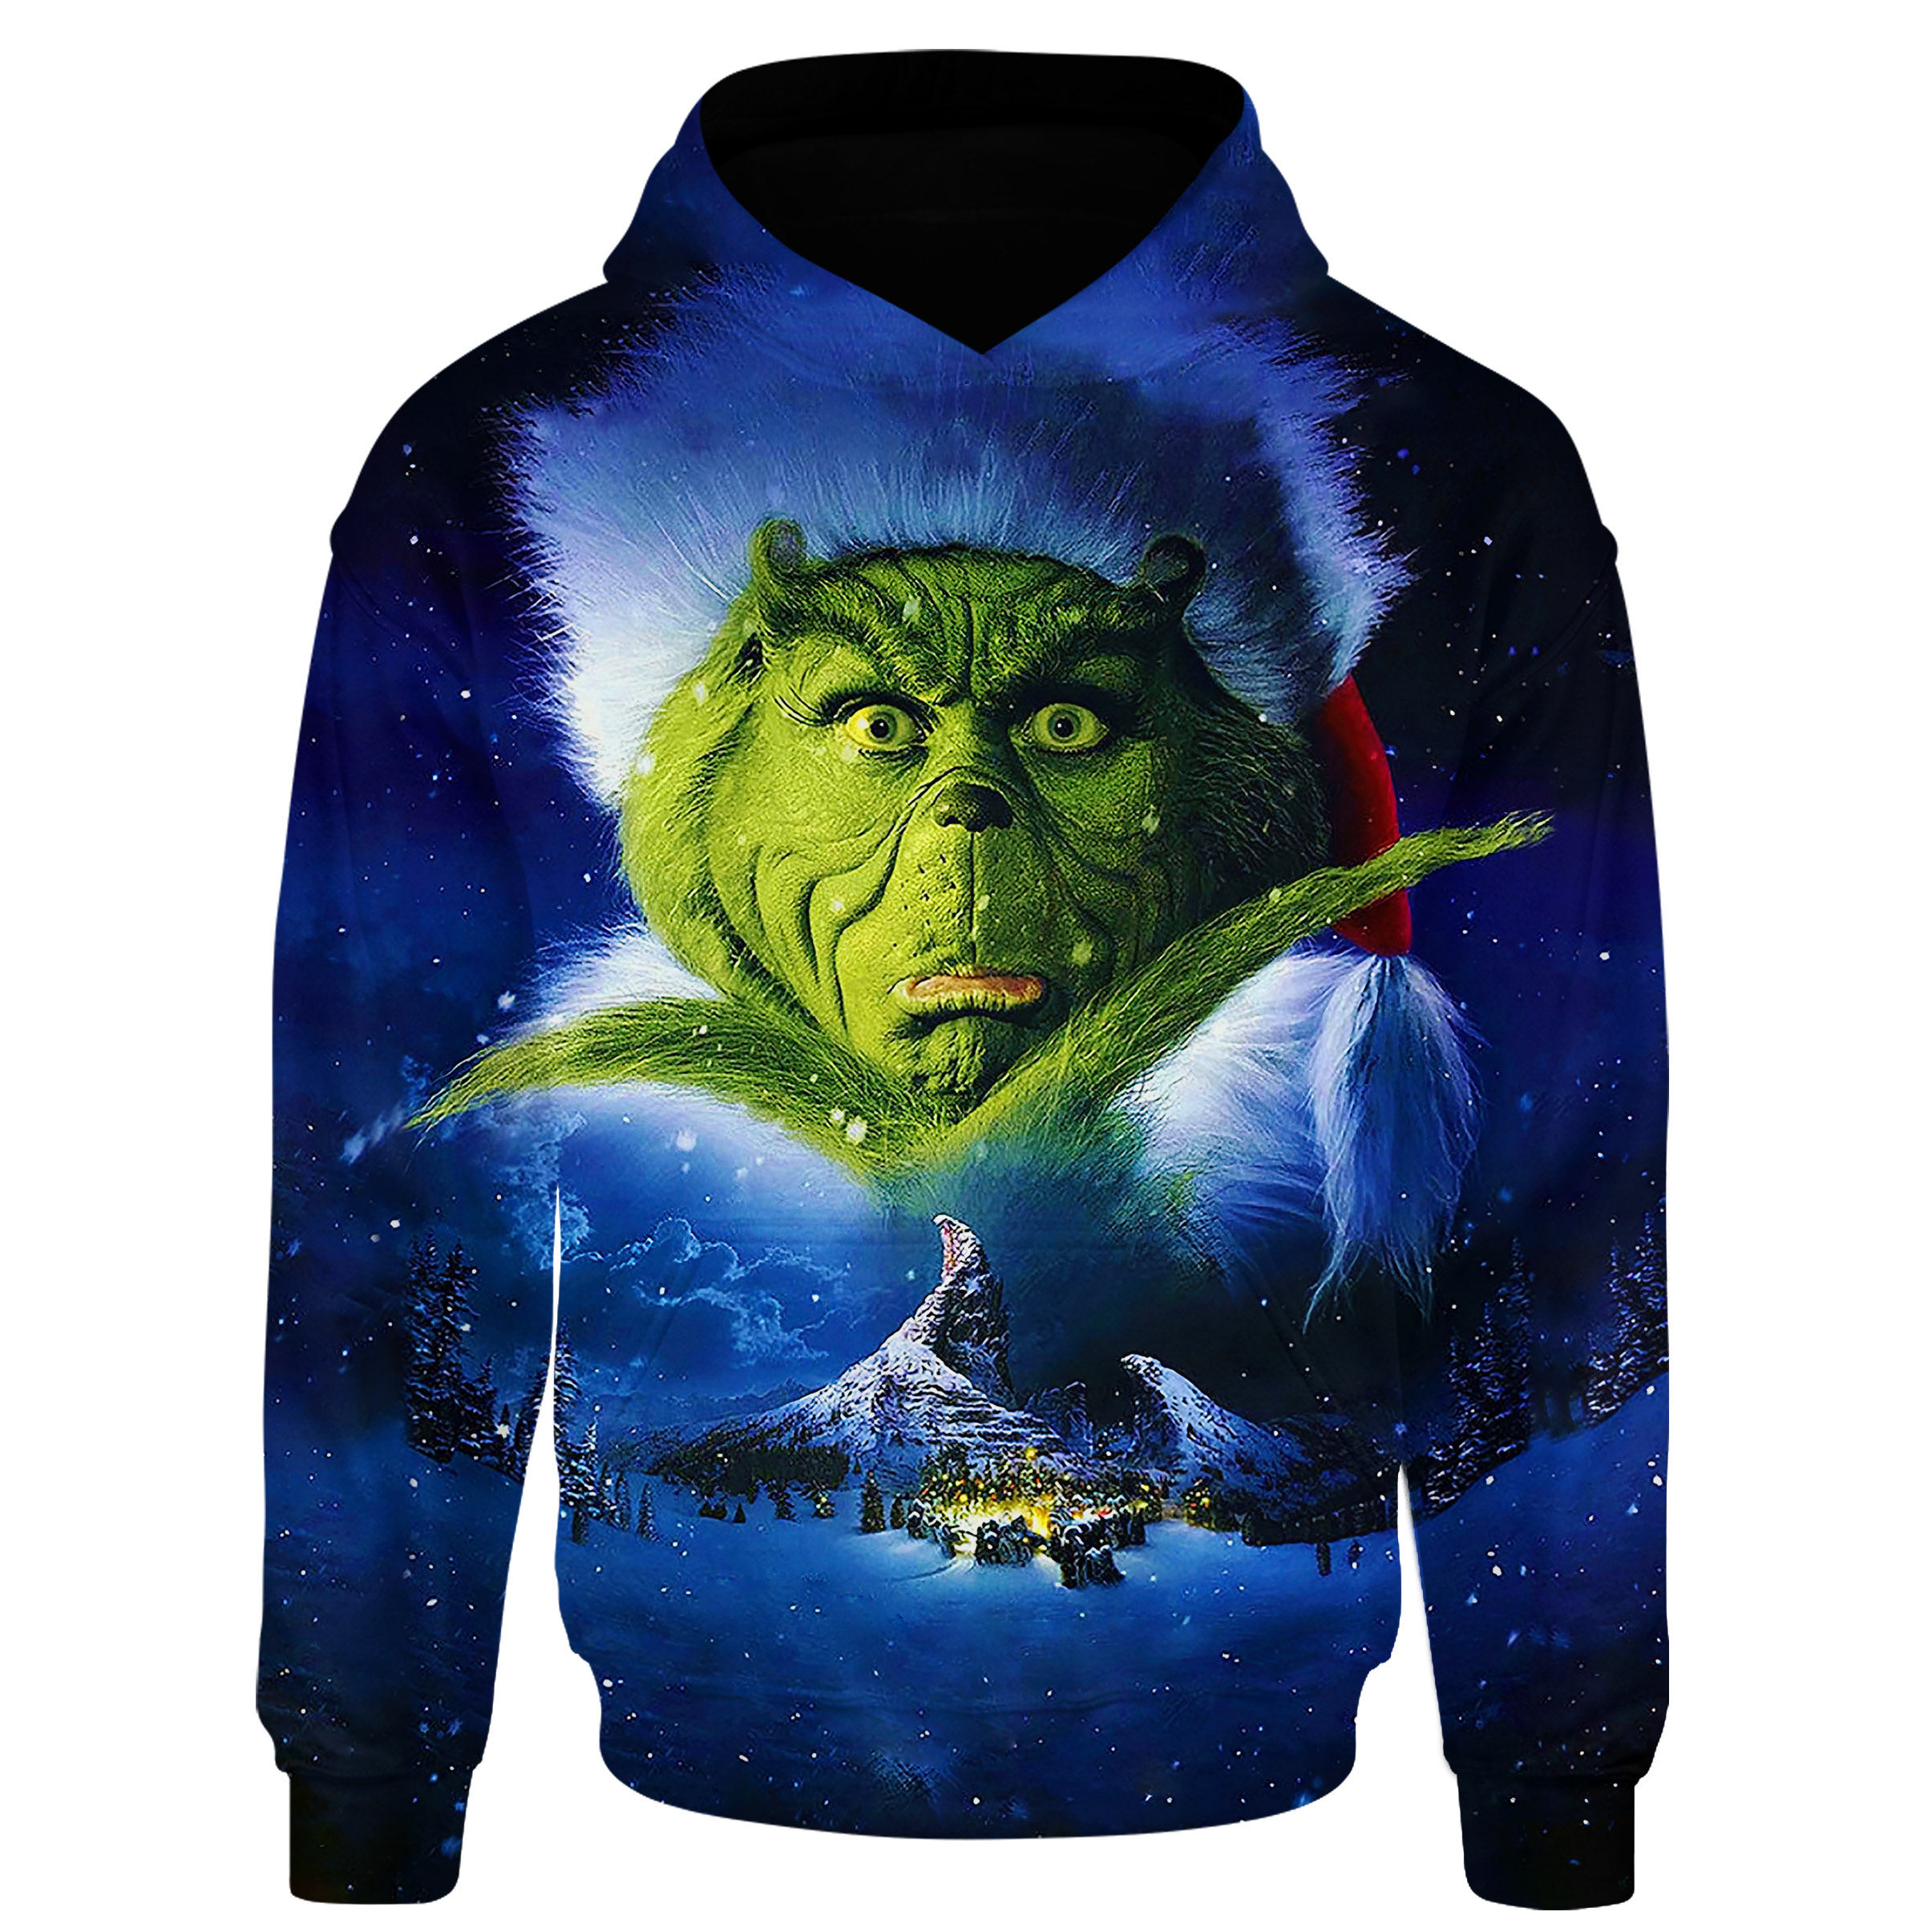 How The Grinch Stole Christmas Hoodie All Over Print Shirt